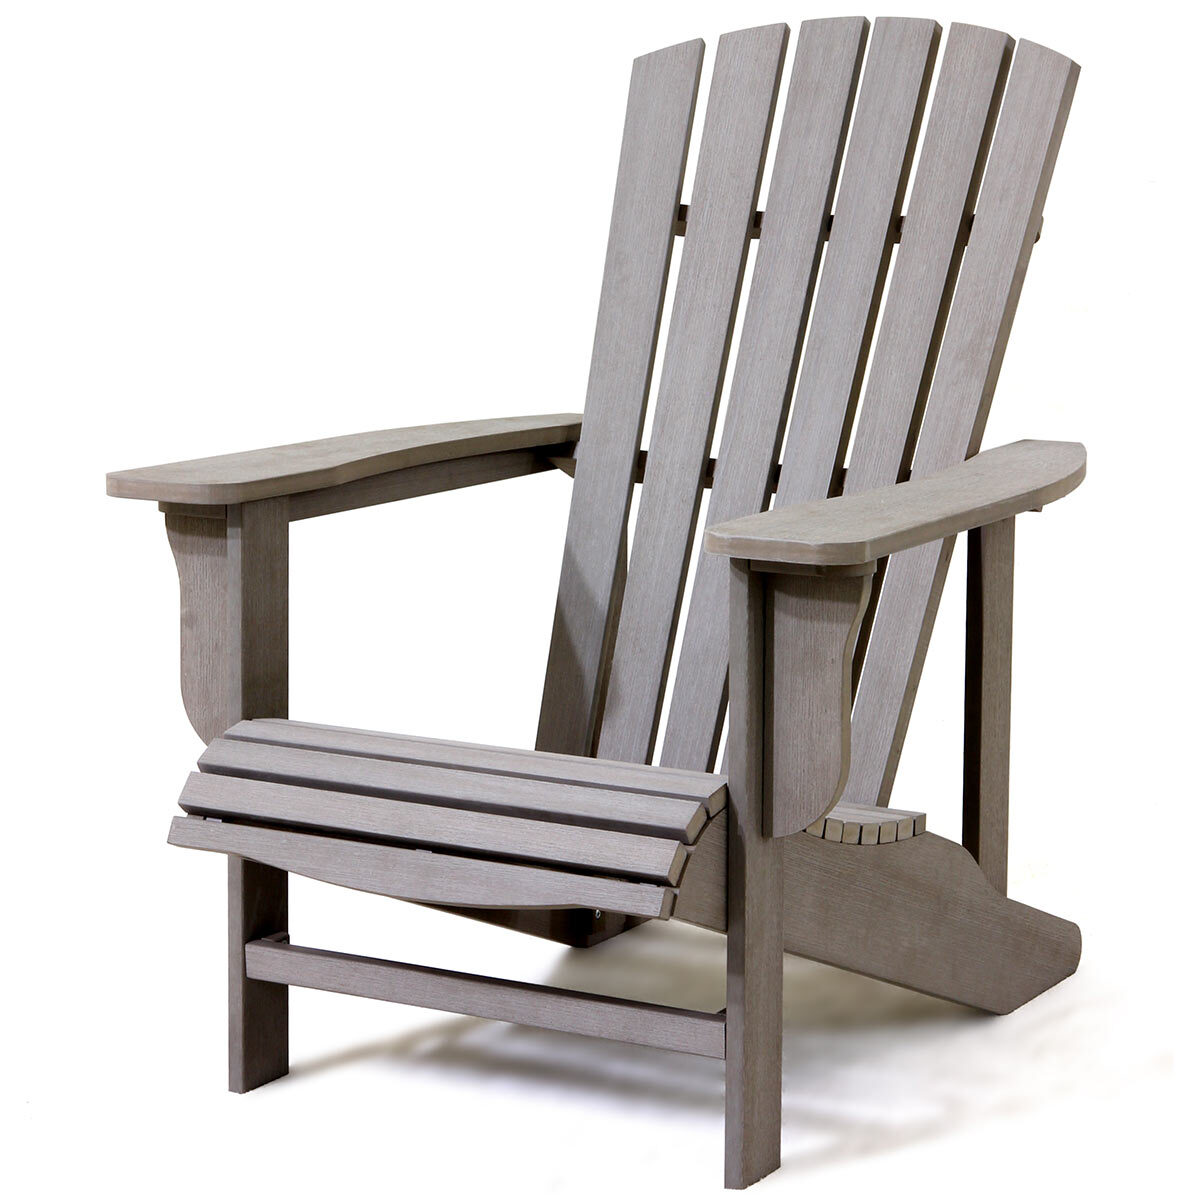 Adirondack Garden Chair and Table Set